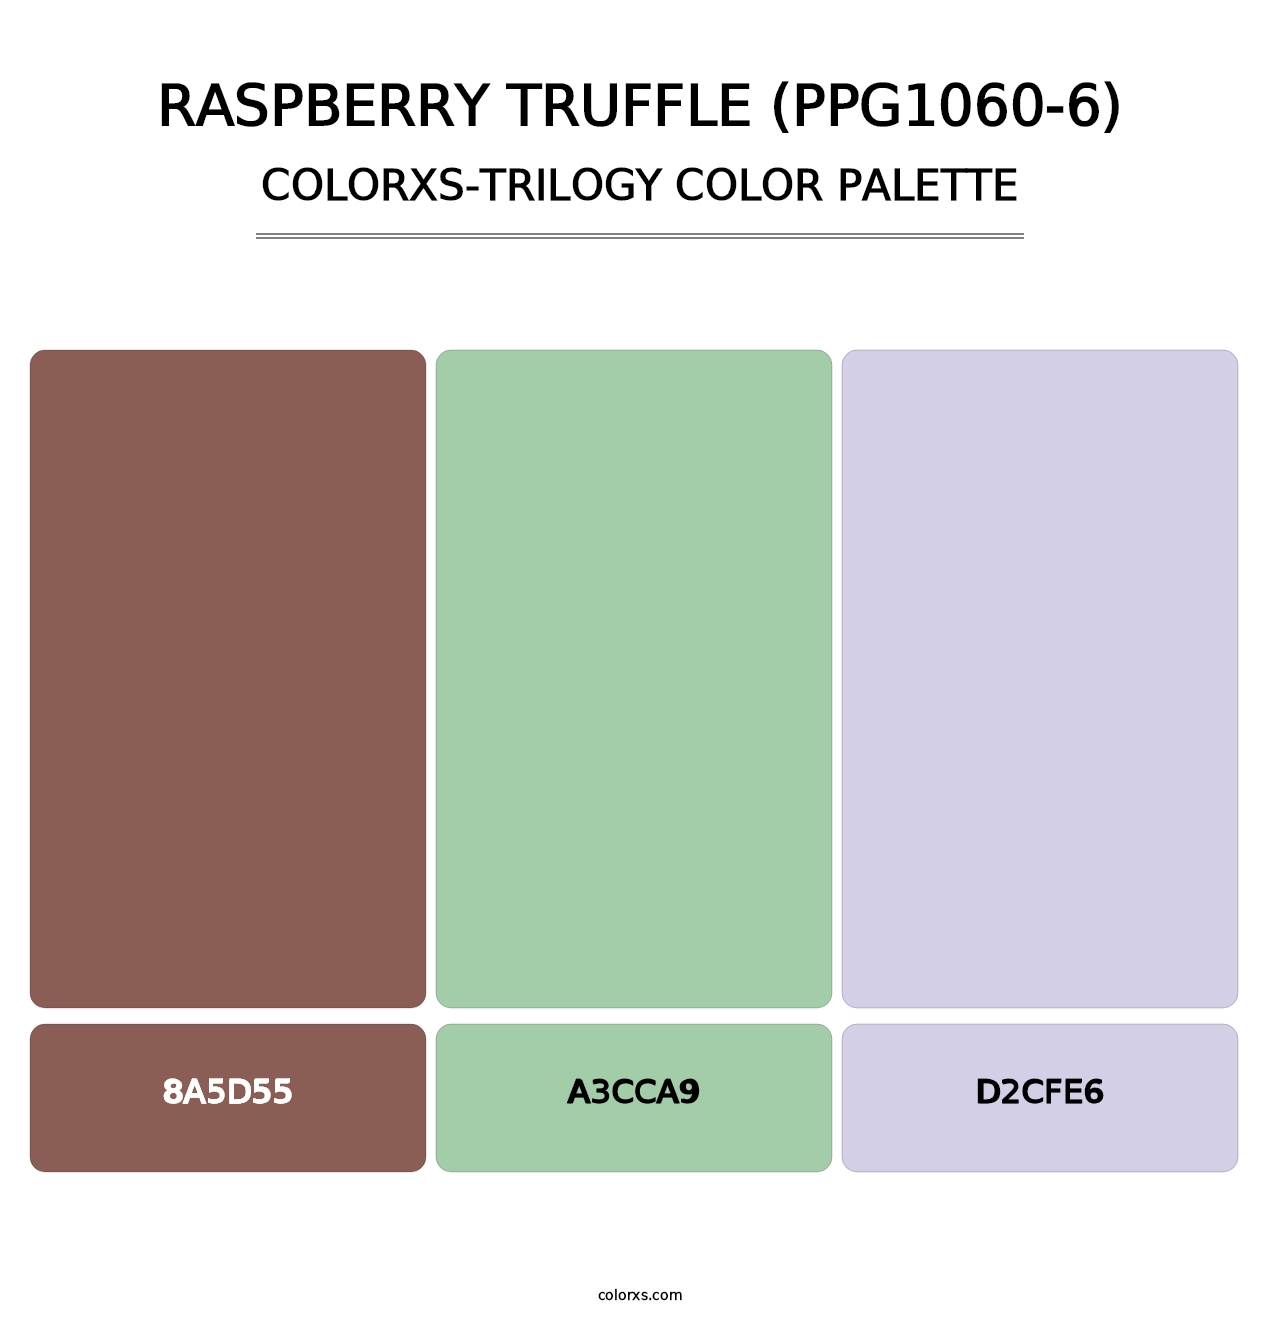 Raspberry Truffle (PPG1060-6) - Colorxs Trilogy Palette